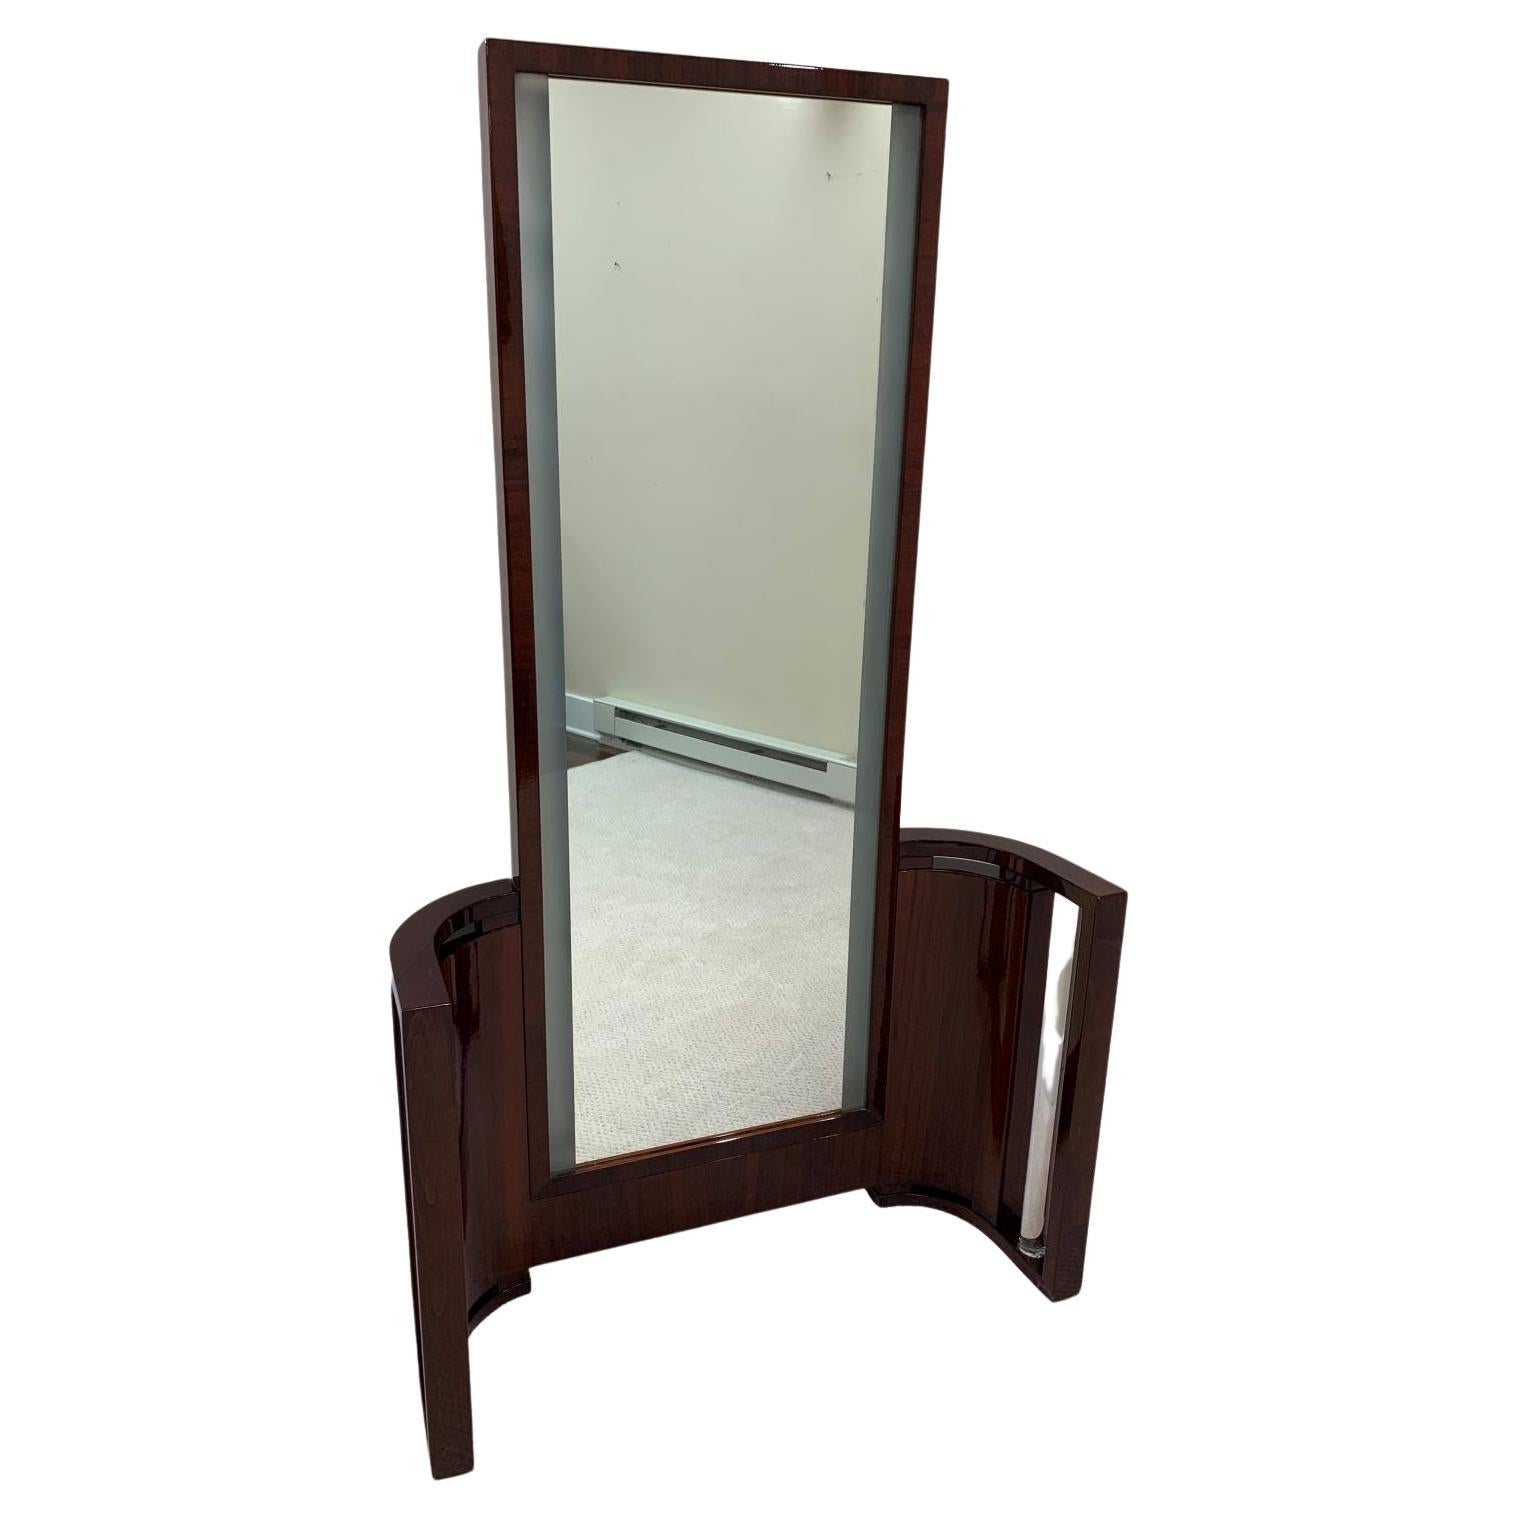 Professionally restored, very unique and rare Art Deco vanity with a light-up mirror all in walnut. Great design with two solid glass rods. This vanity would be great with a bench or could be utilized in almost any room as a full-length mirror. The